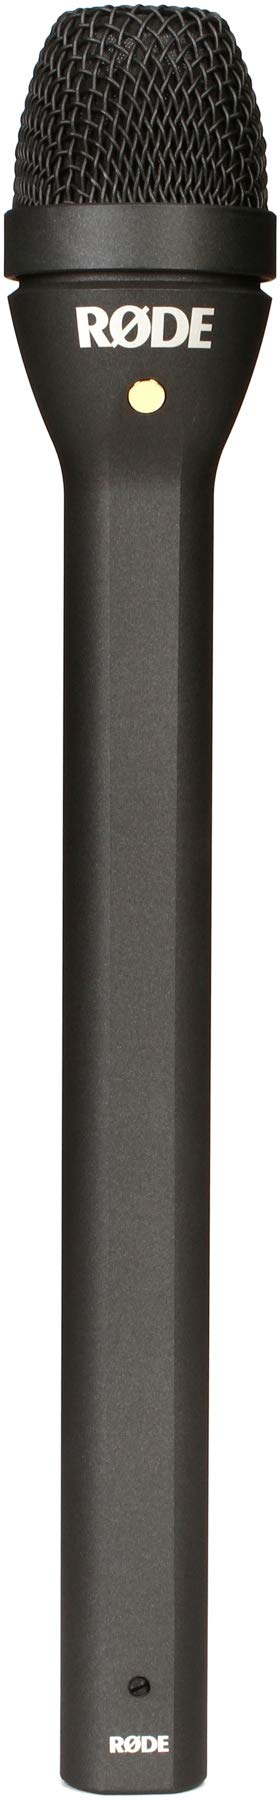 RØDE Microphones Rode Reporter Omnidirectional Dynamic Microphone